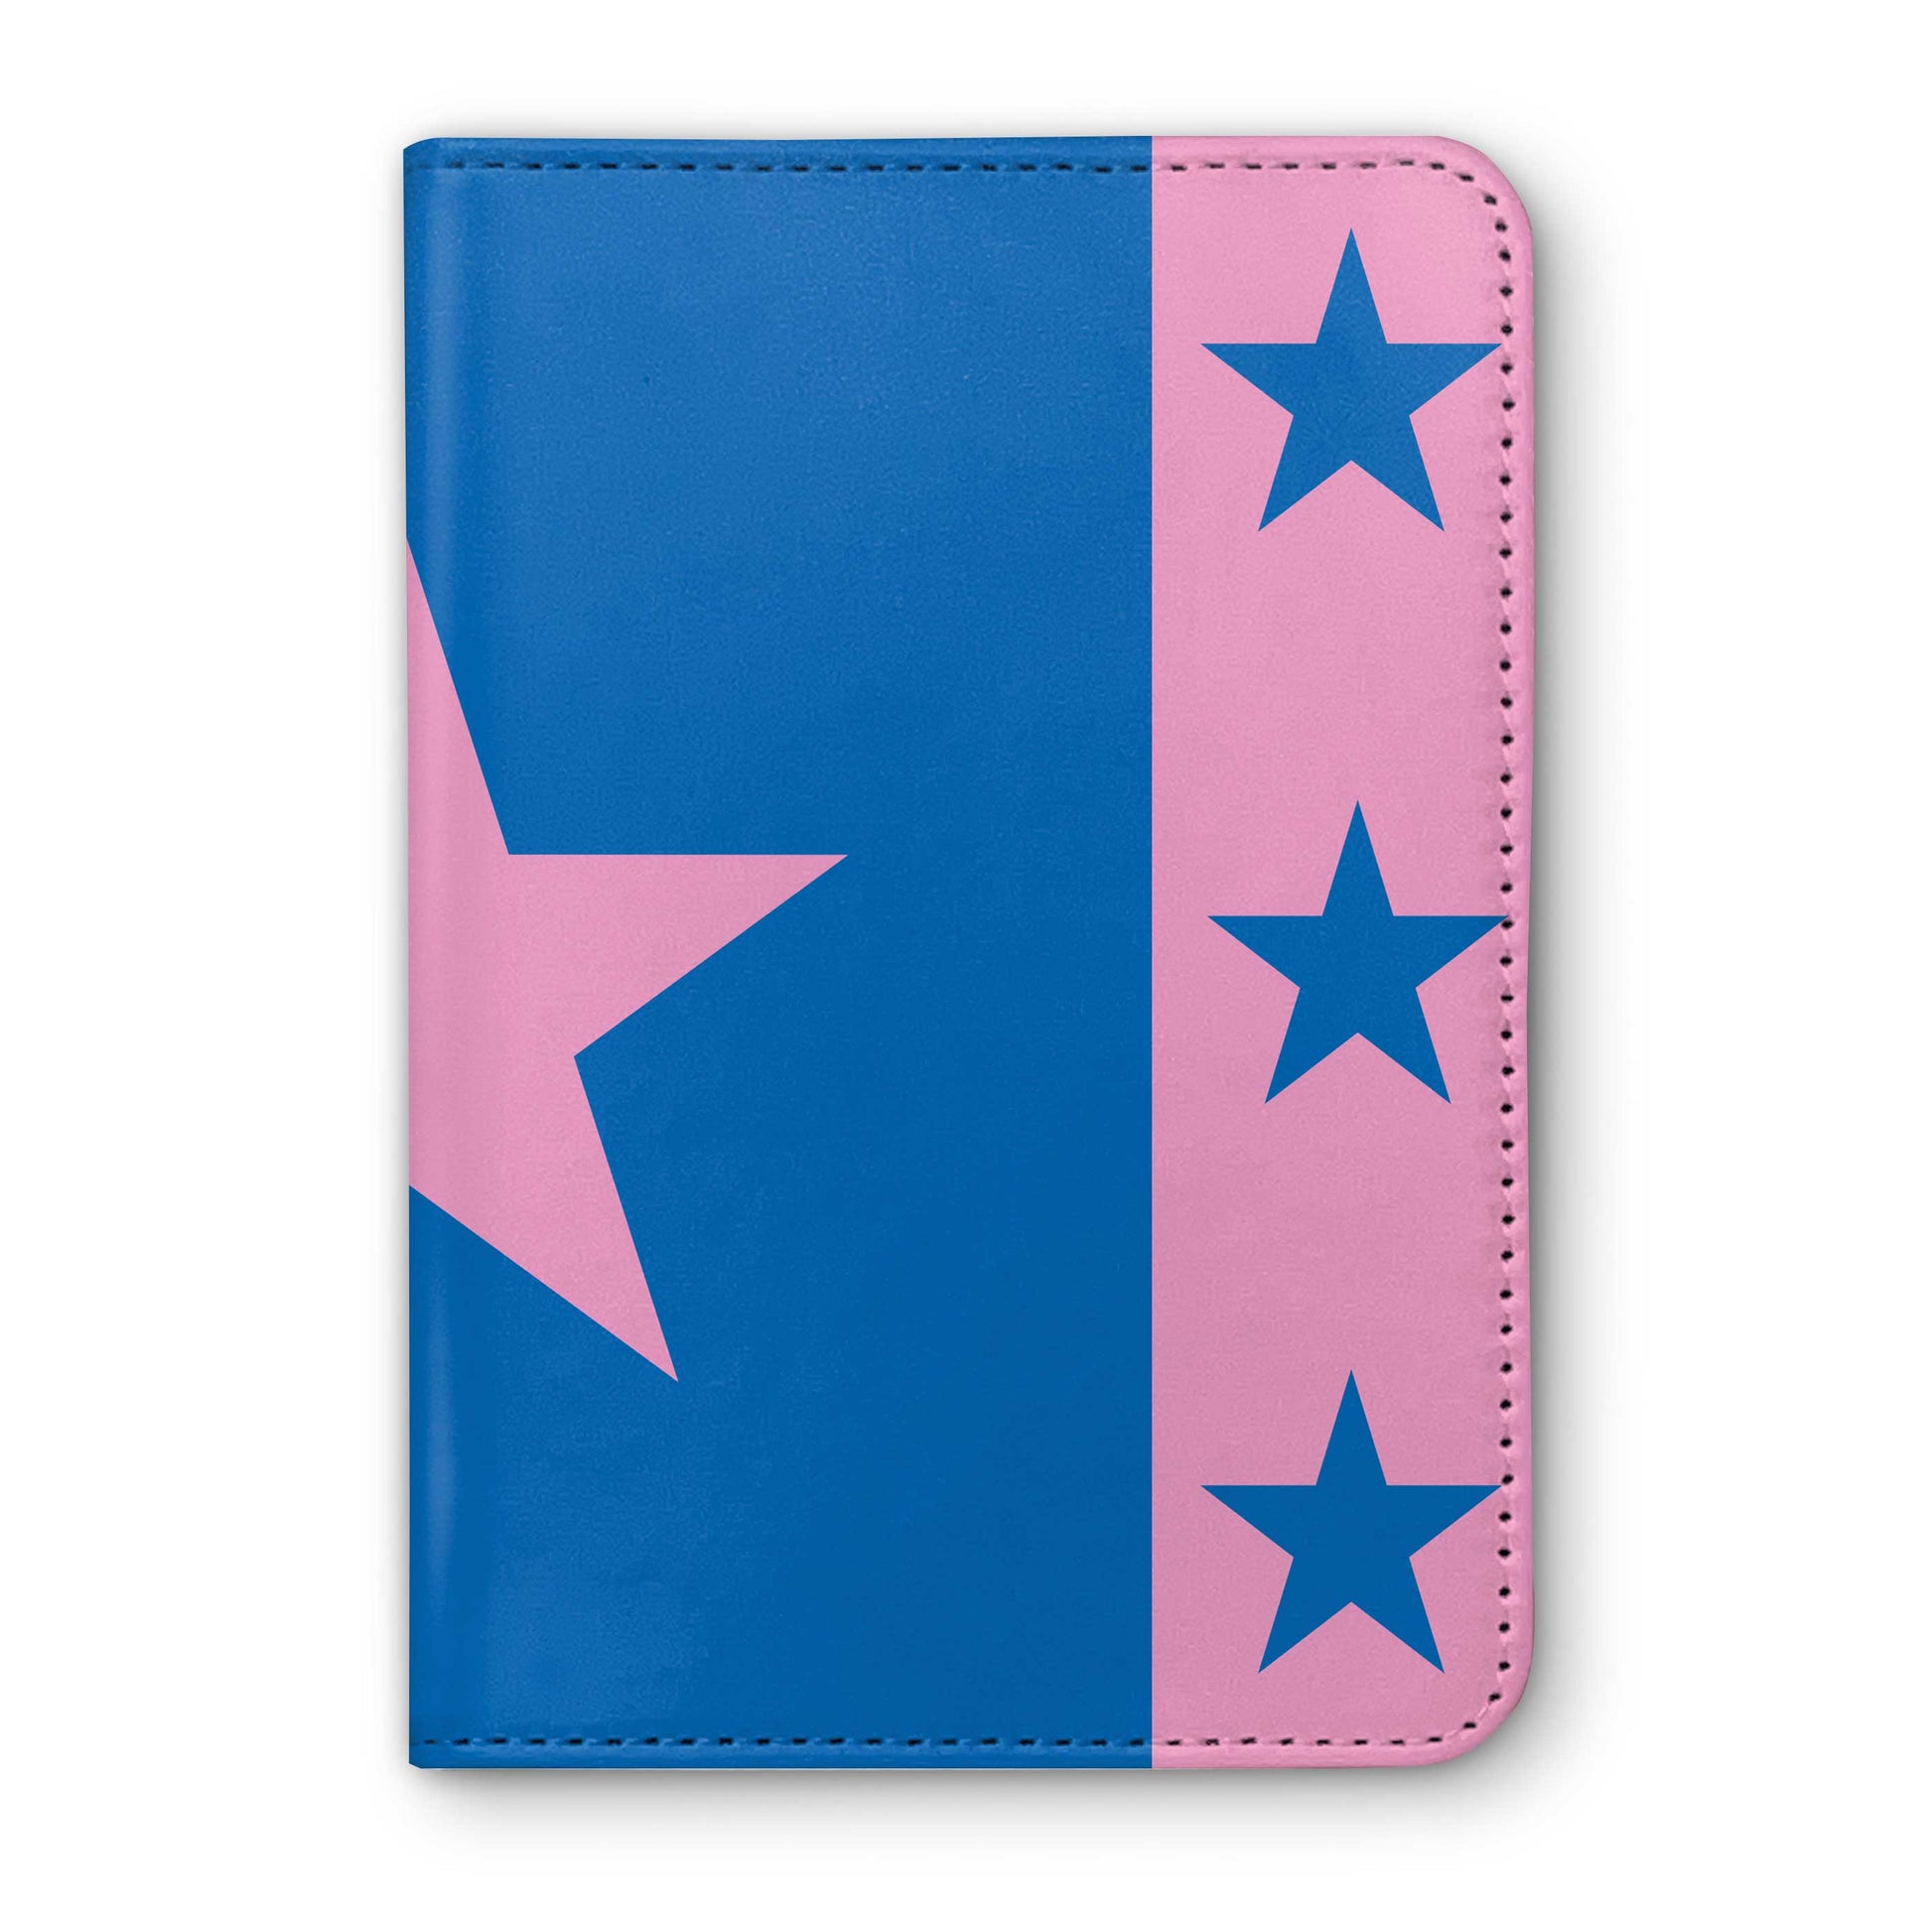 J Perriss  Horse Racing Passport Holder - Hacked Up Horse Racing Gifts